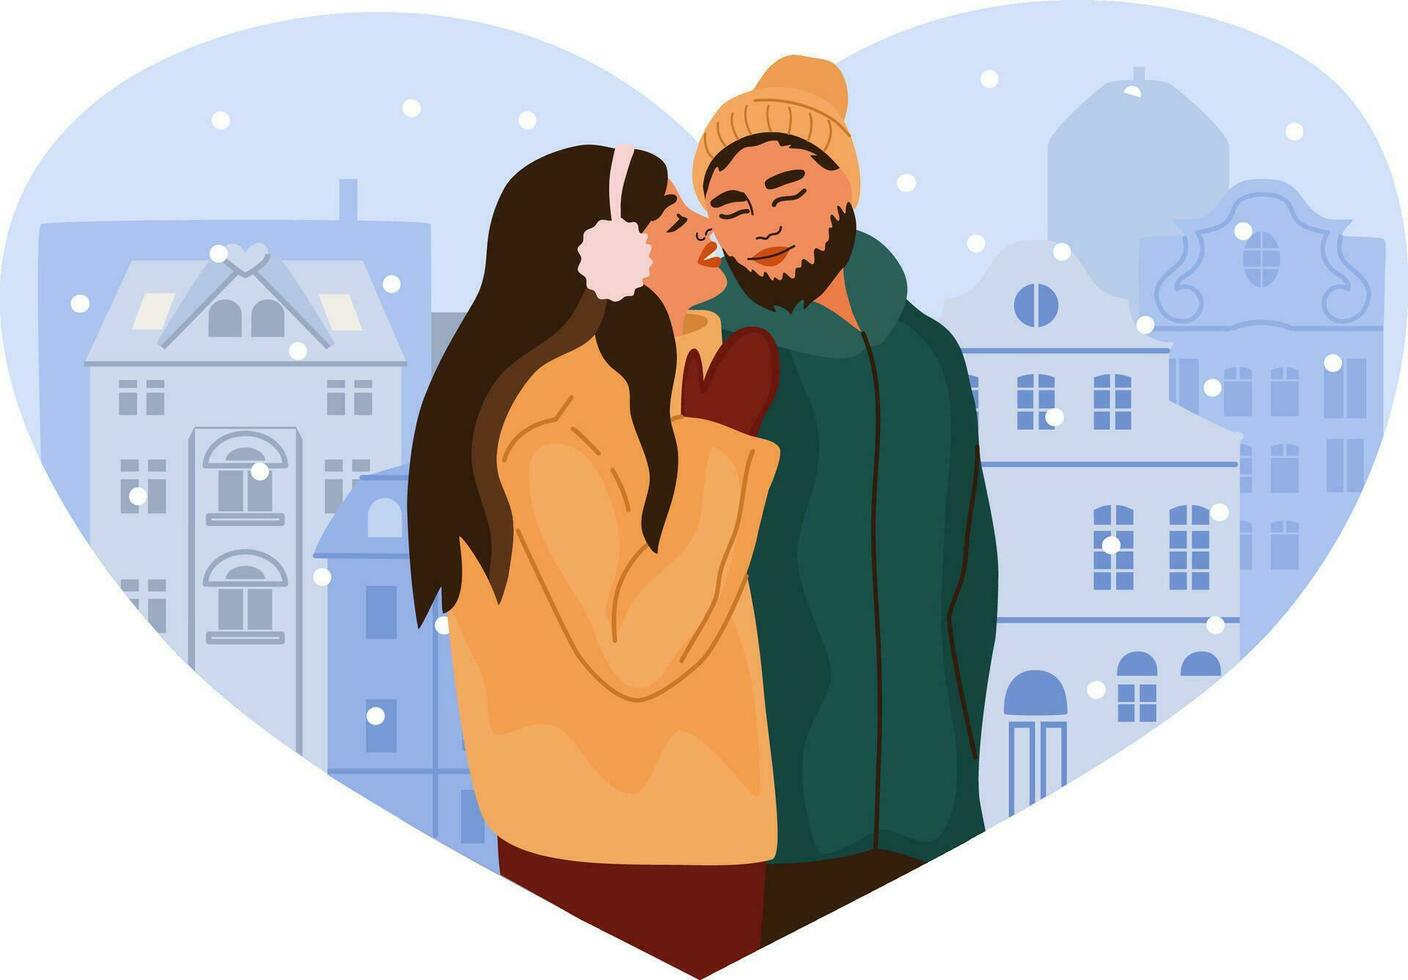 Beautiful romantic couple hugging on heart shaped background. Man and woman in winter clothes. Christmas time romantic activities. vector